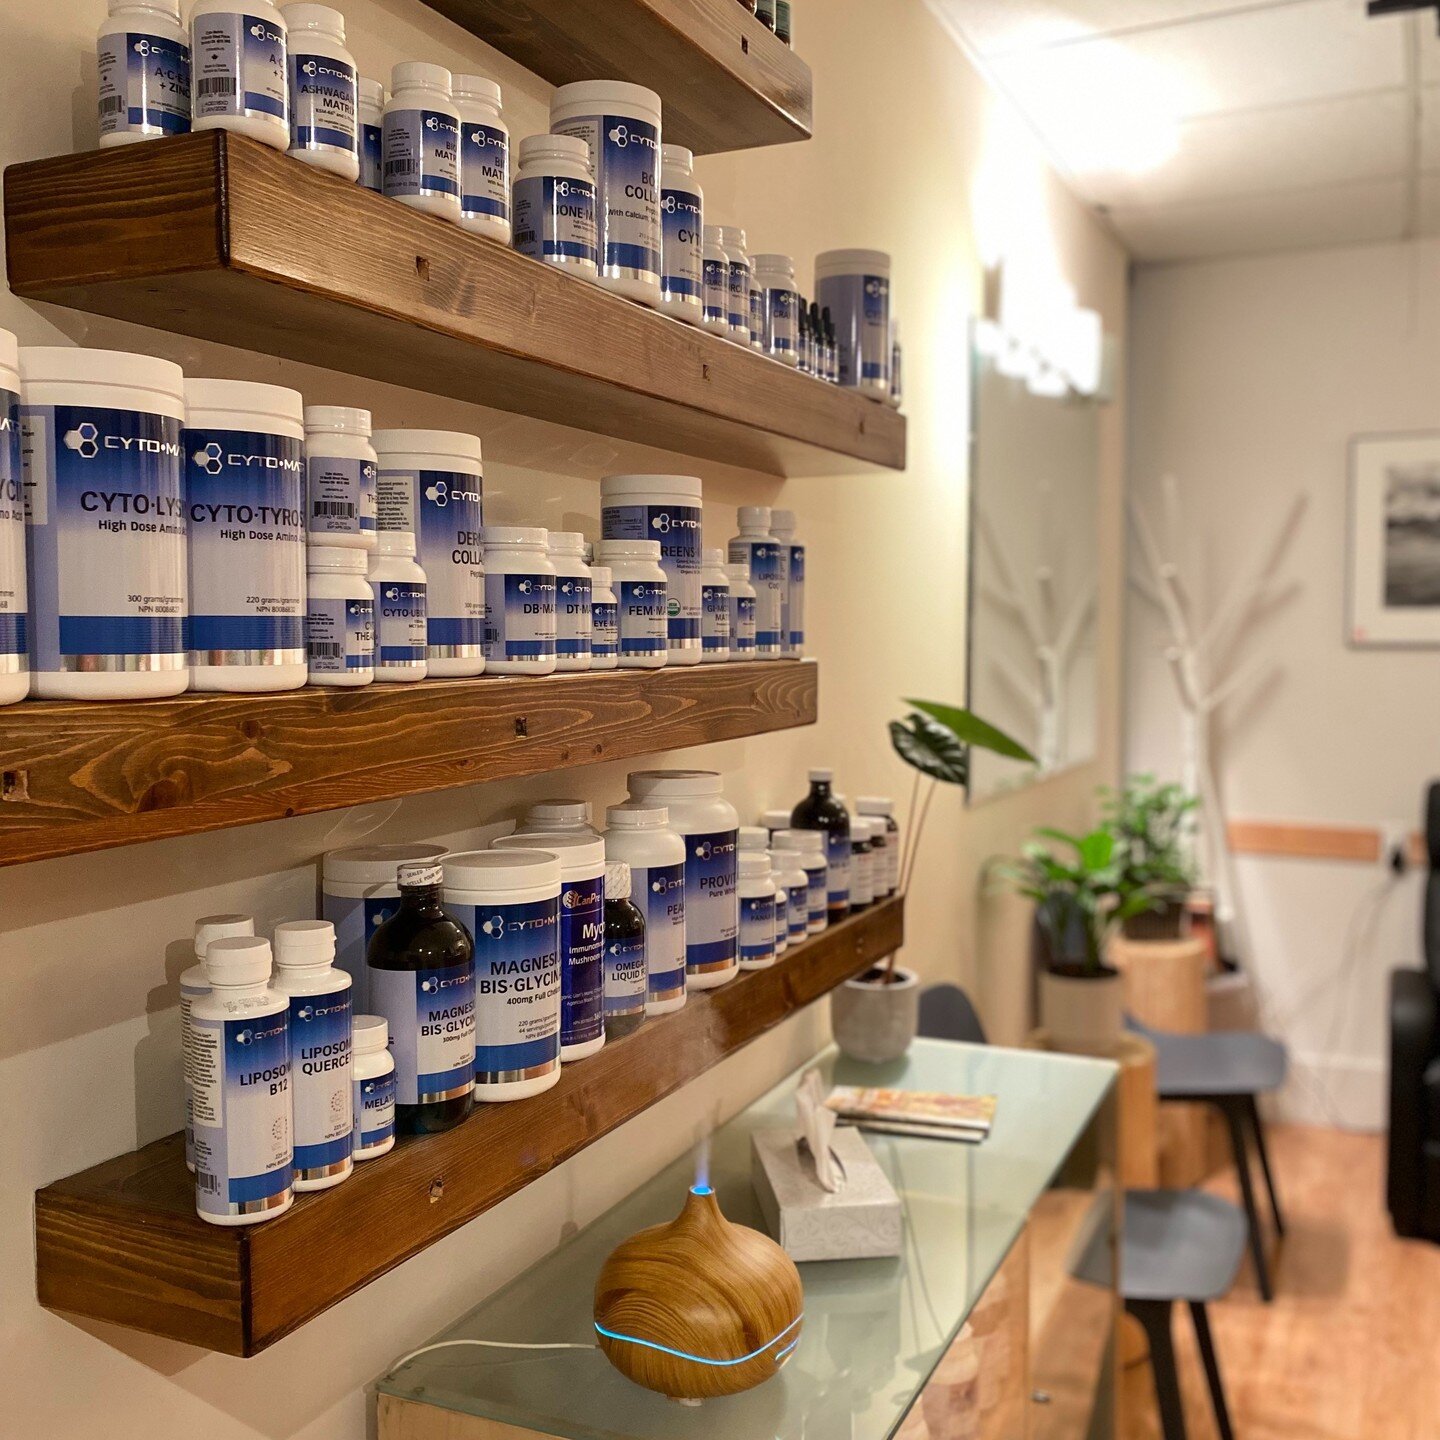 ✨Come and take a look at our range of Natural Supplements. From gut health to sleep support, muscle recovery to joint health and everything else in between... we've got you covered 🙌

#whistlerwellness #supplements #selfcare